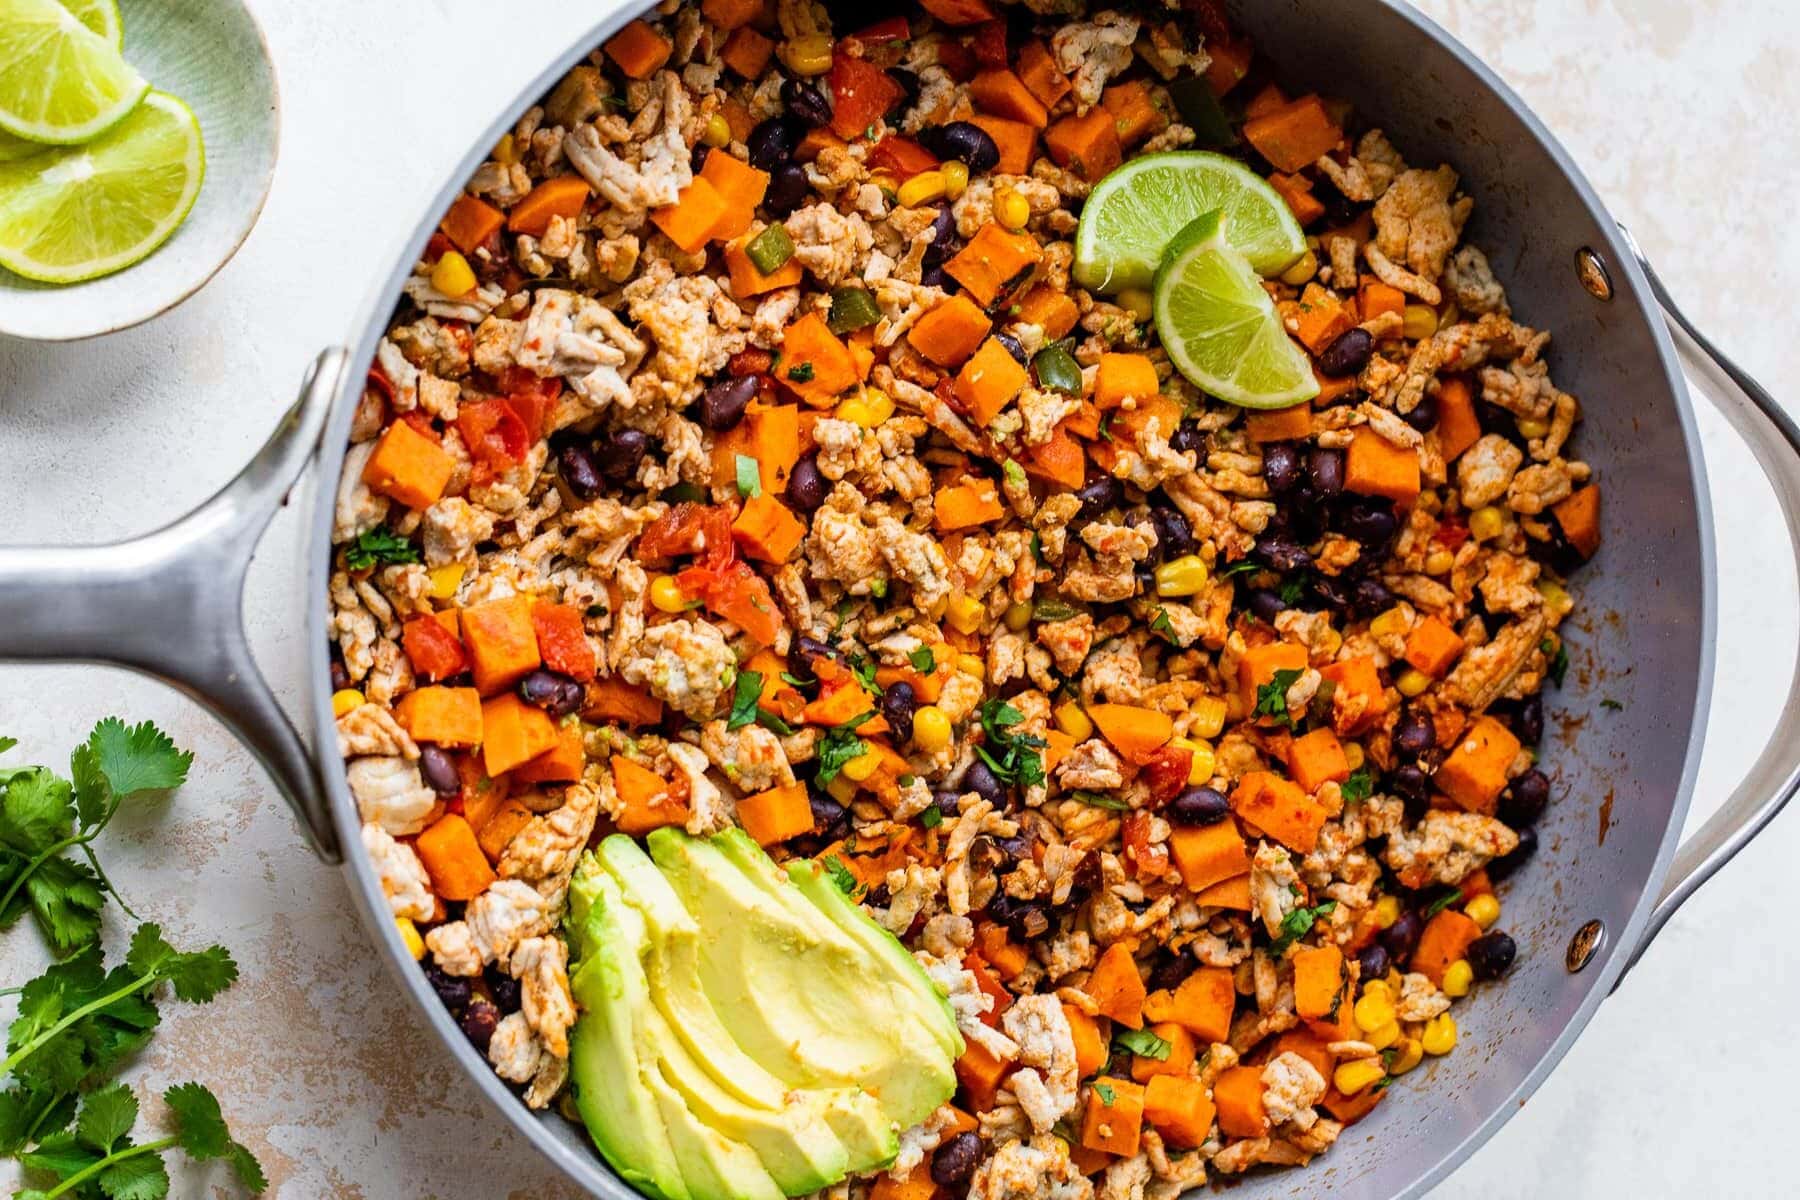 Ground Turkey Skillet with Sweet Potatoes and Black Beans